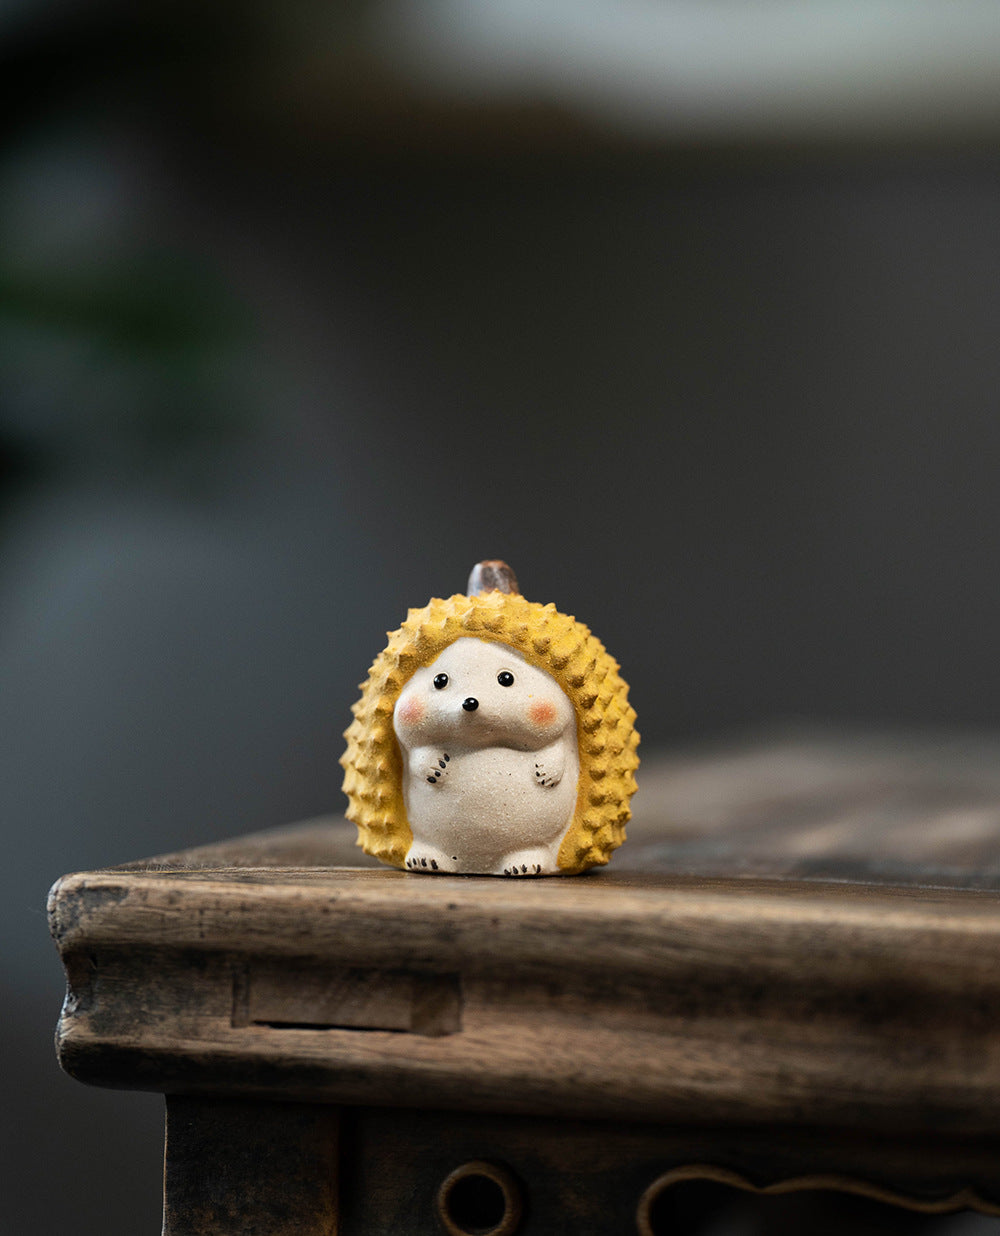 "Durian Cat and Durian Hedgehog” sculpture